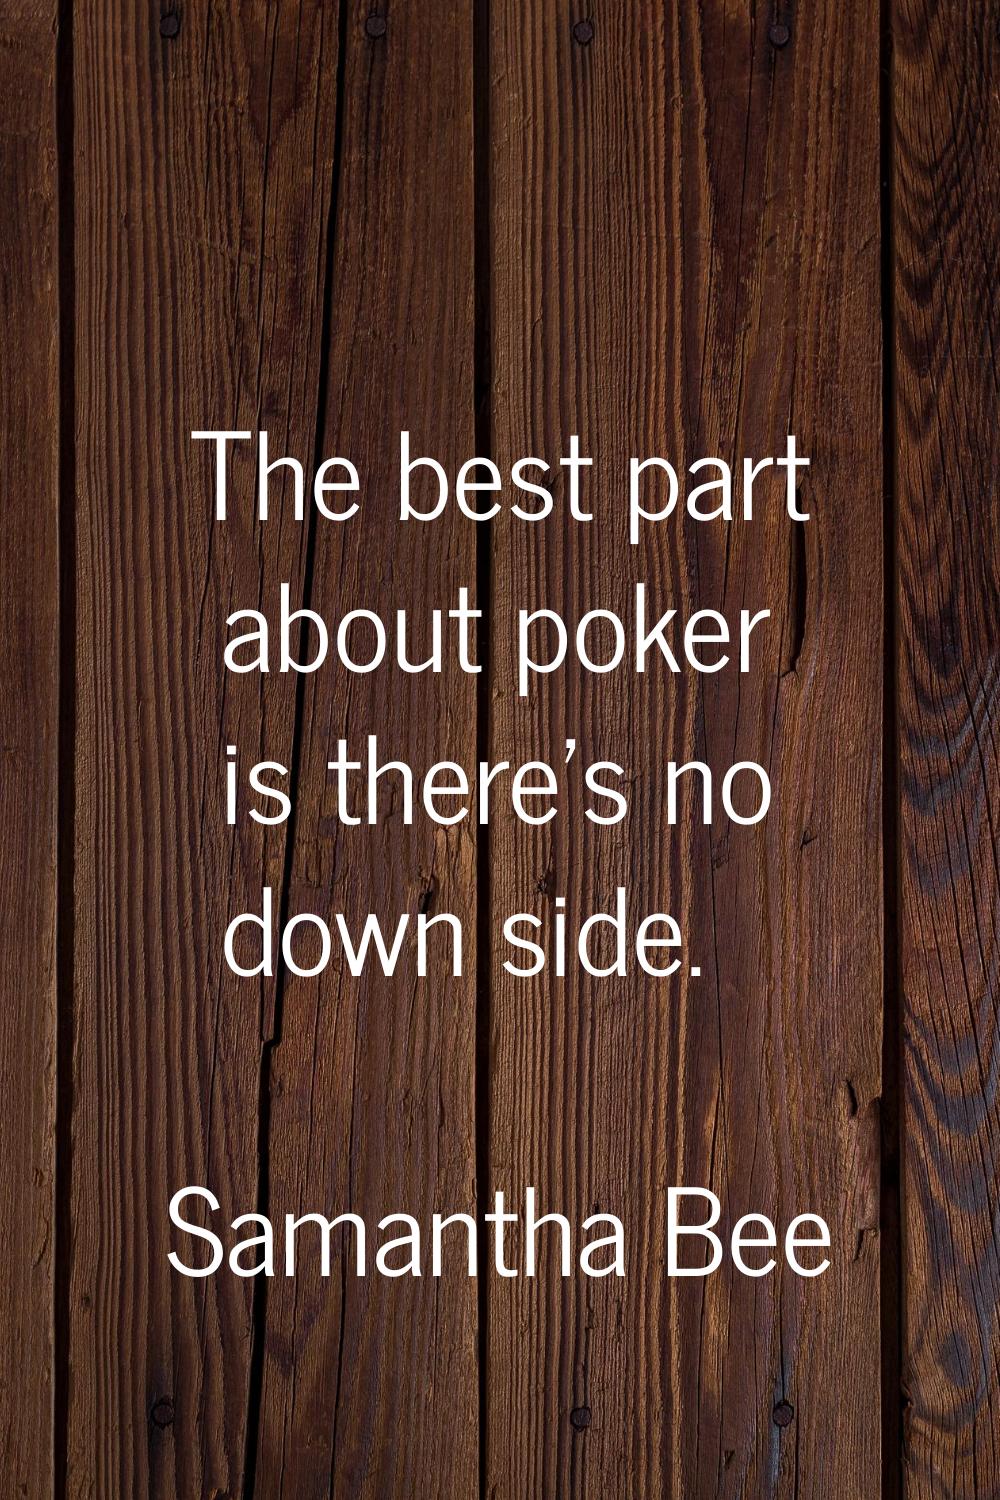 The best part about poker is there's no down side.